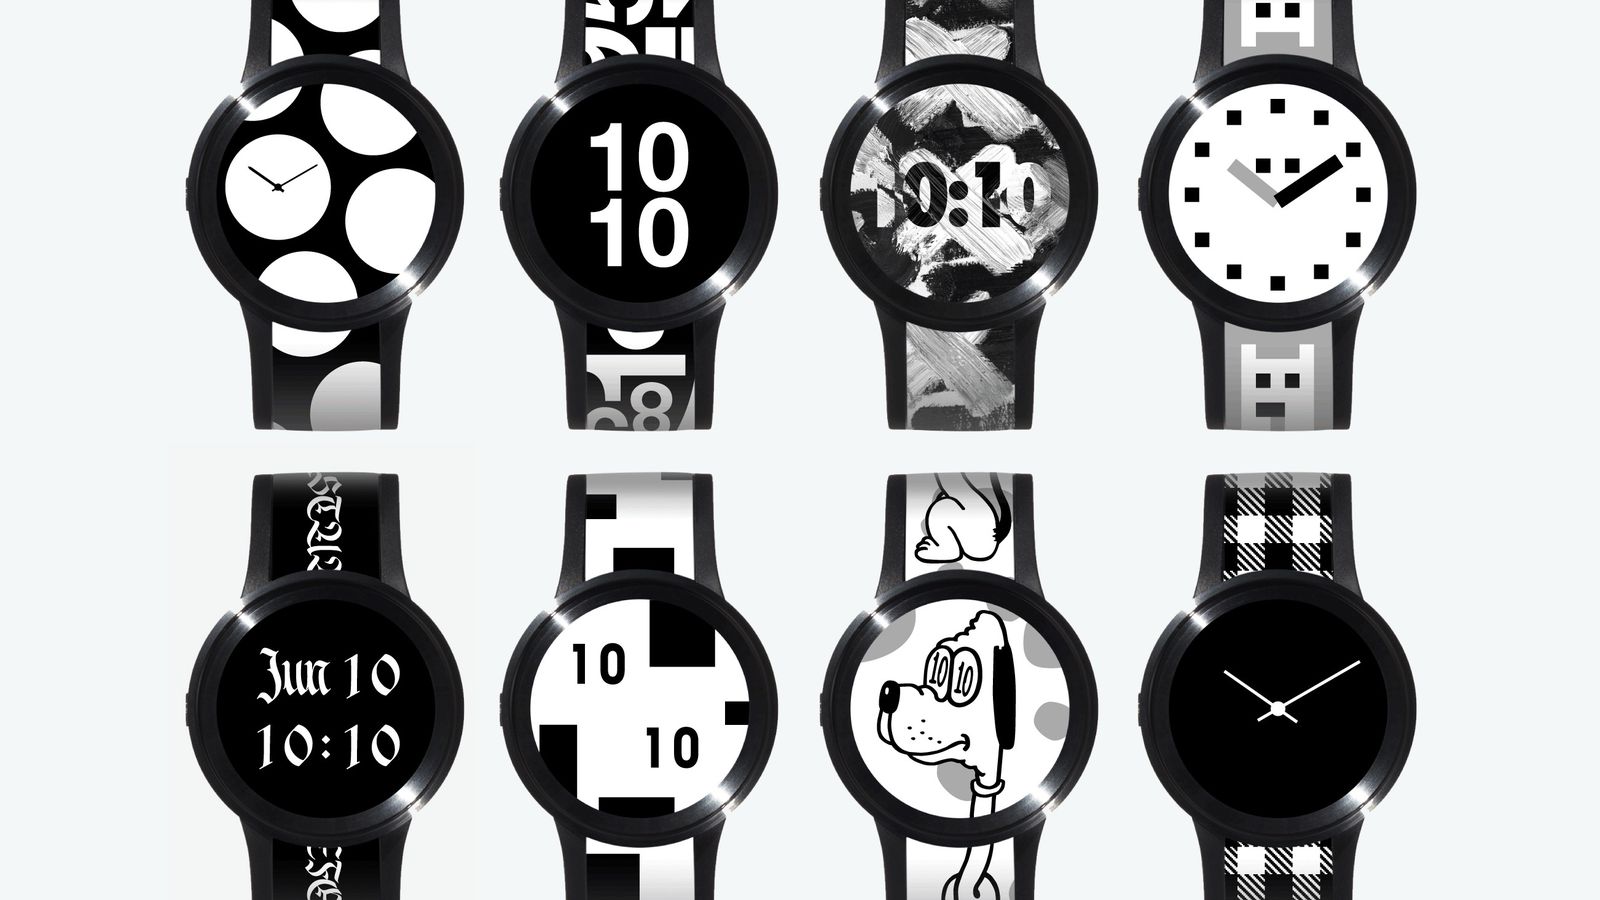 Sony's new E Ink watch goes on sale in Japan today - The Verge